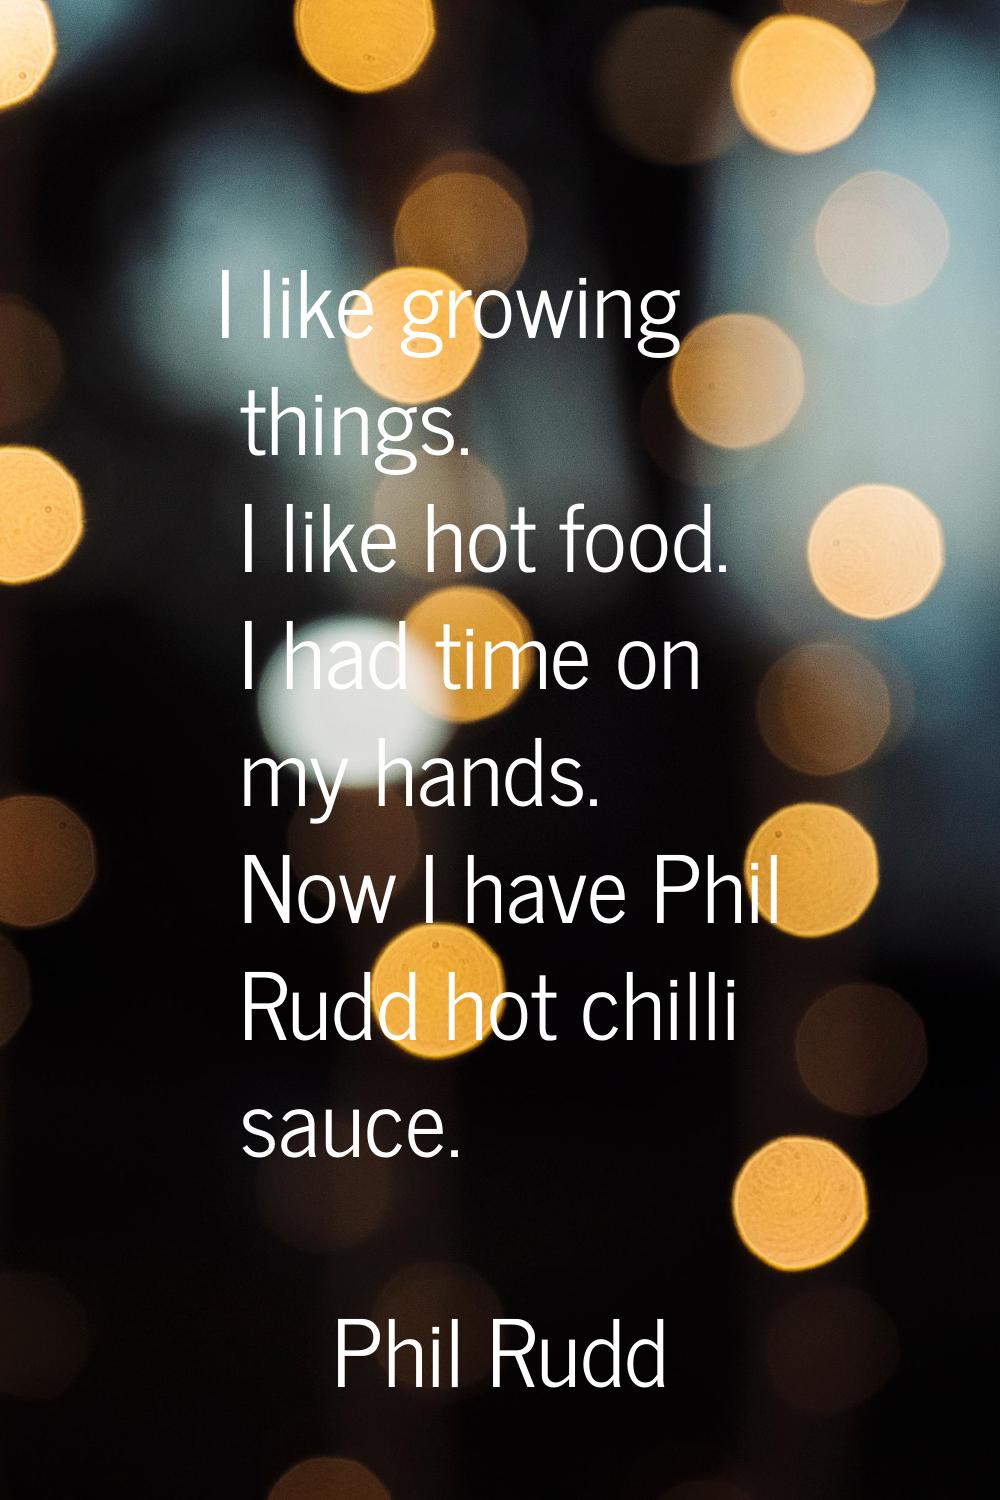 I like growing things. I like hot food. I had time on my hands. Now I have Phil Rudd hot chilli sau